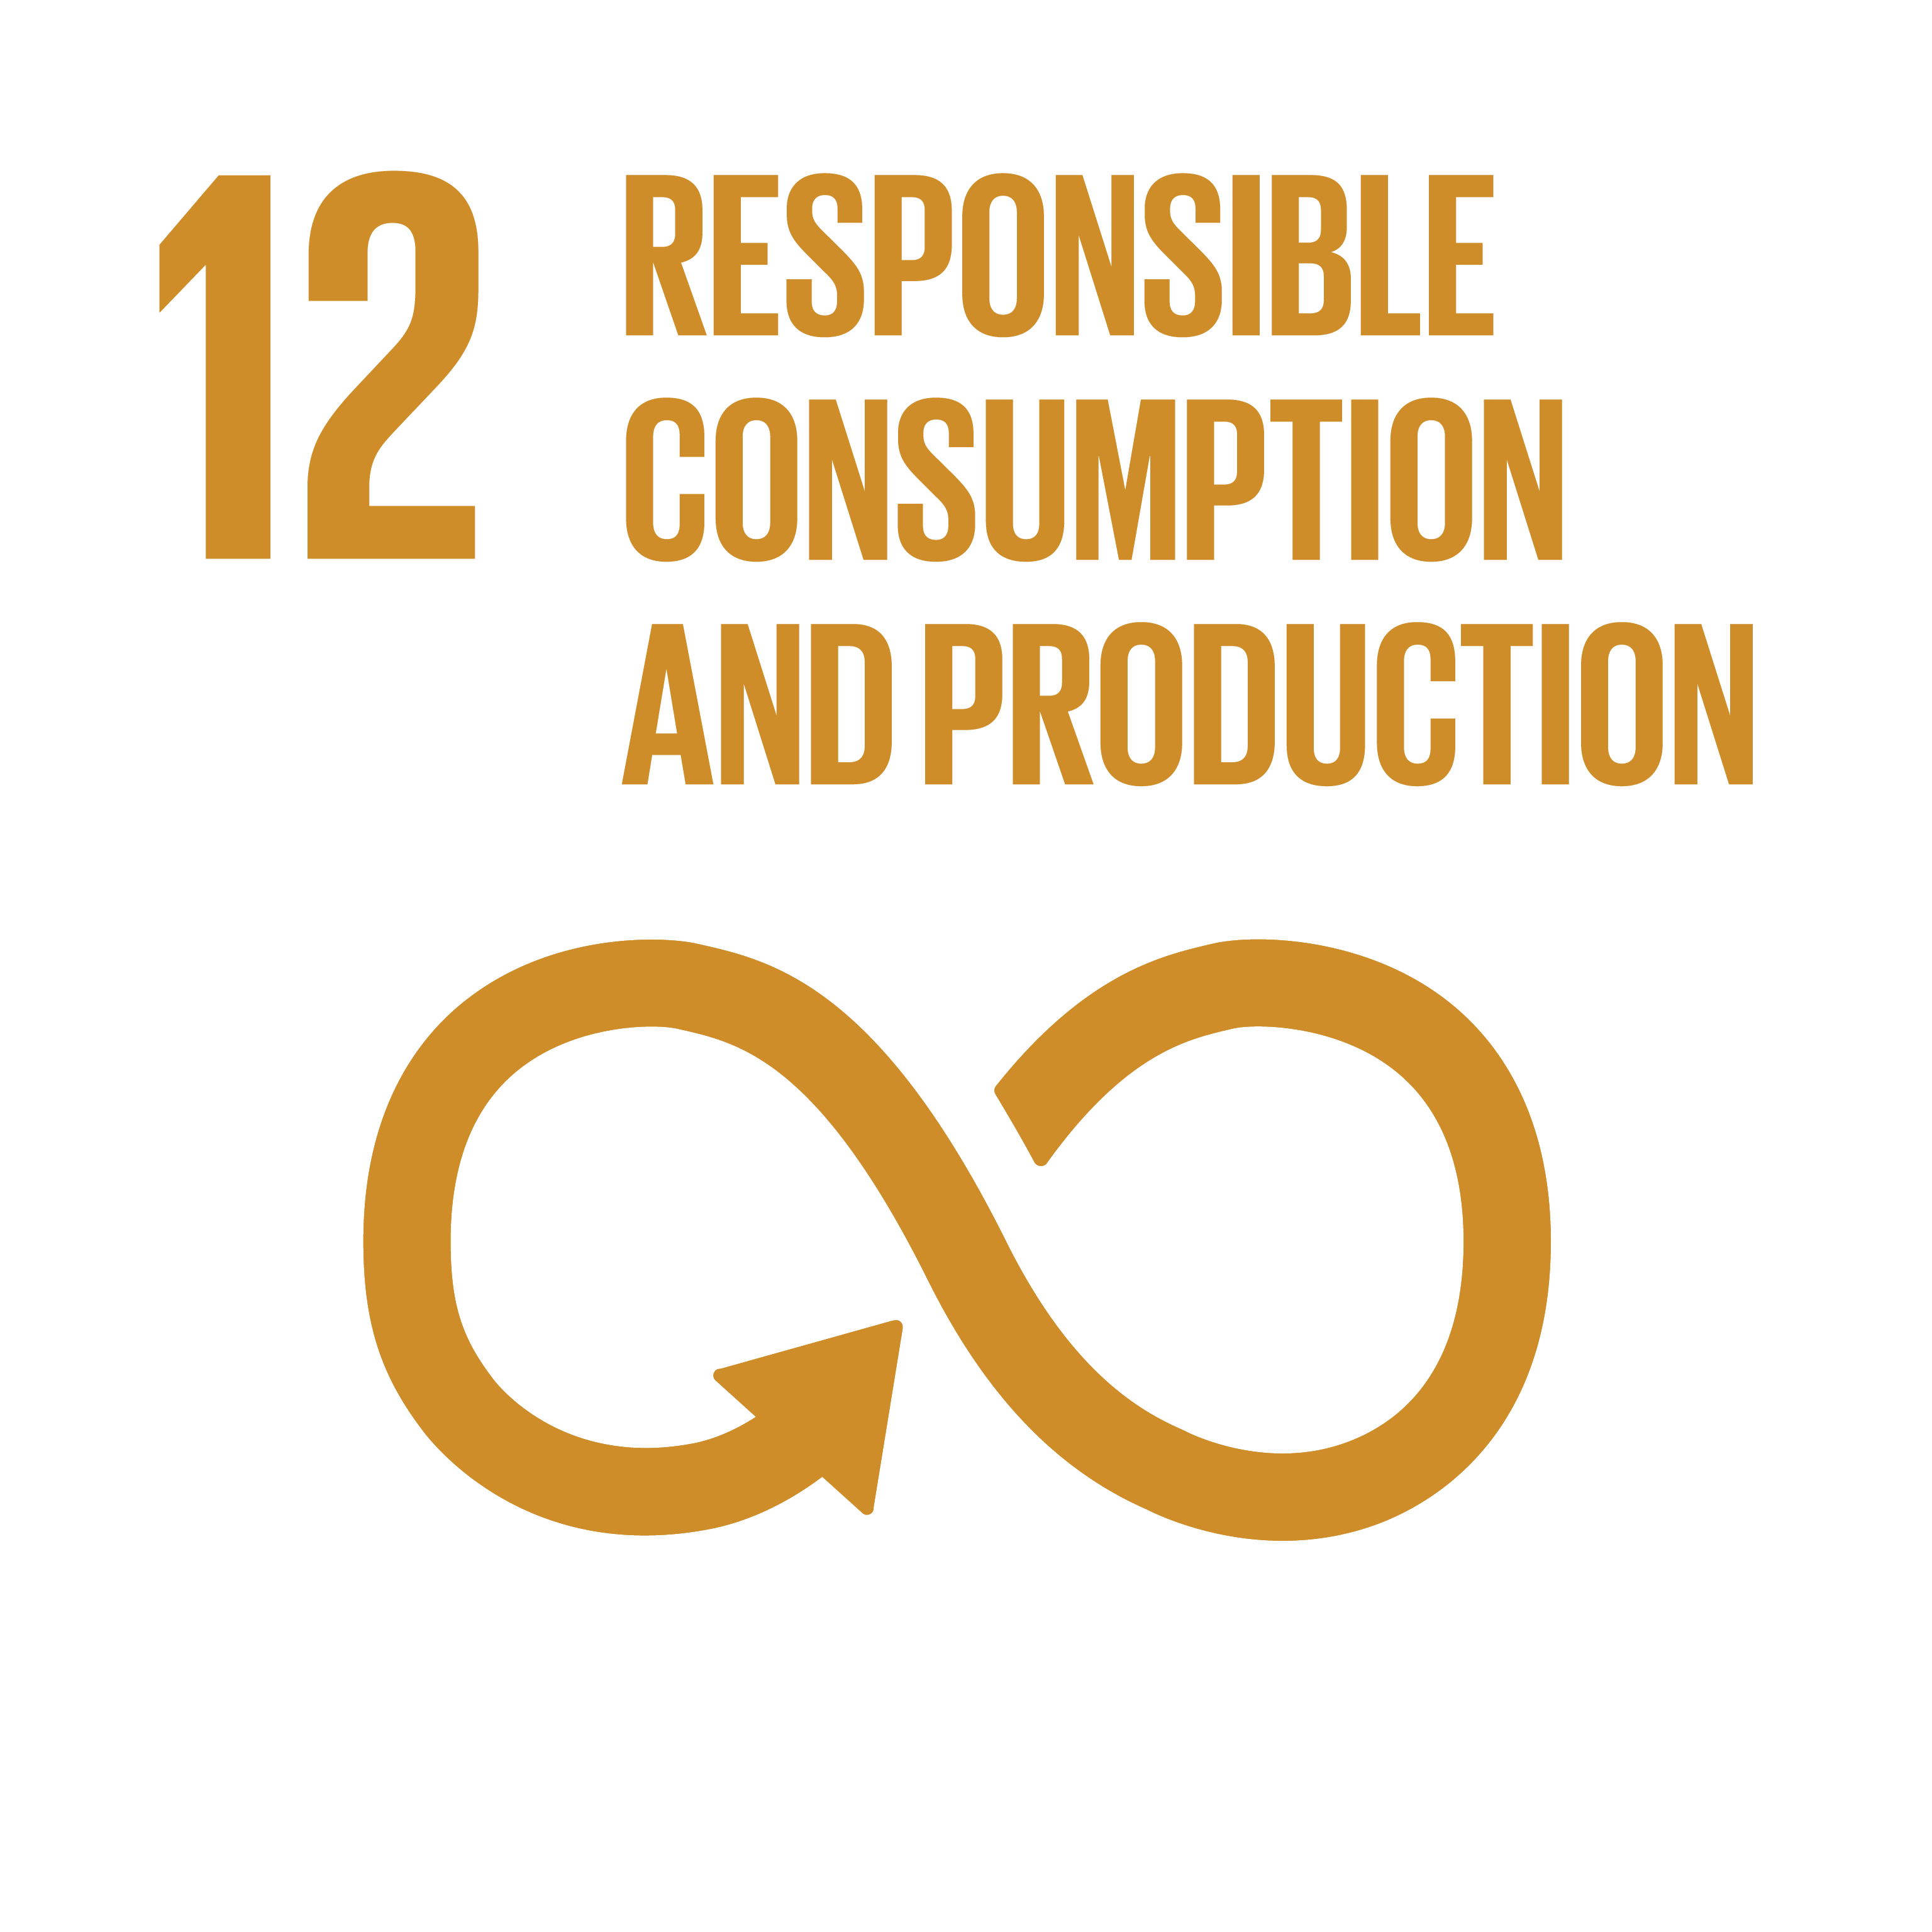 Responsible consumption and production - SDG goal 12